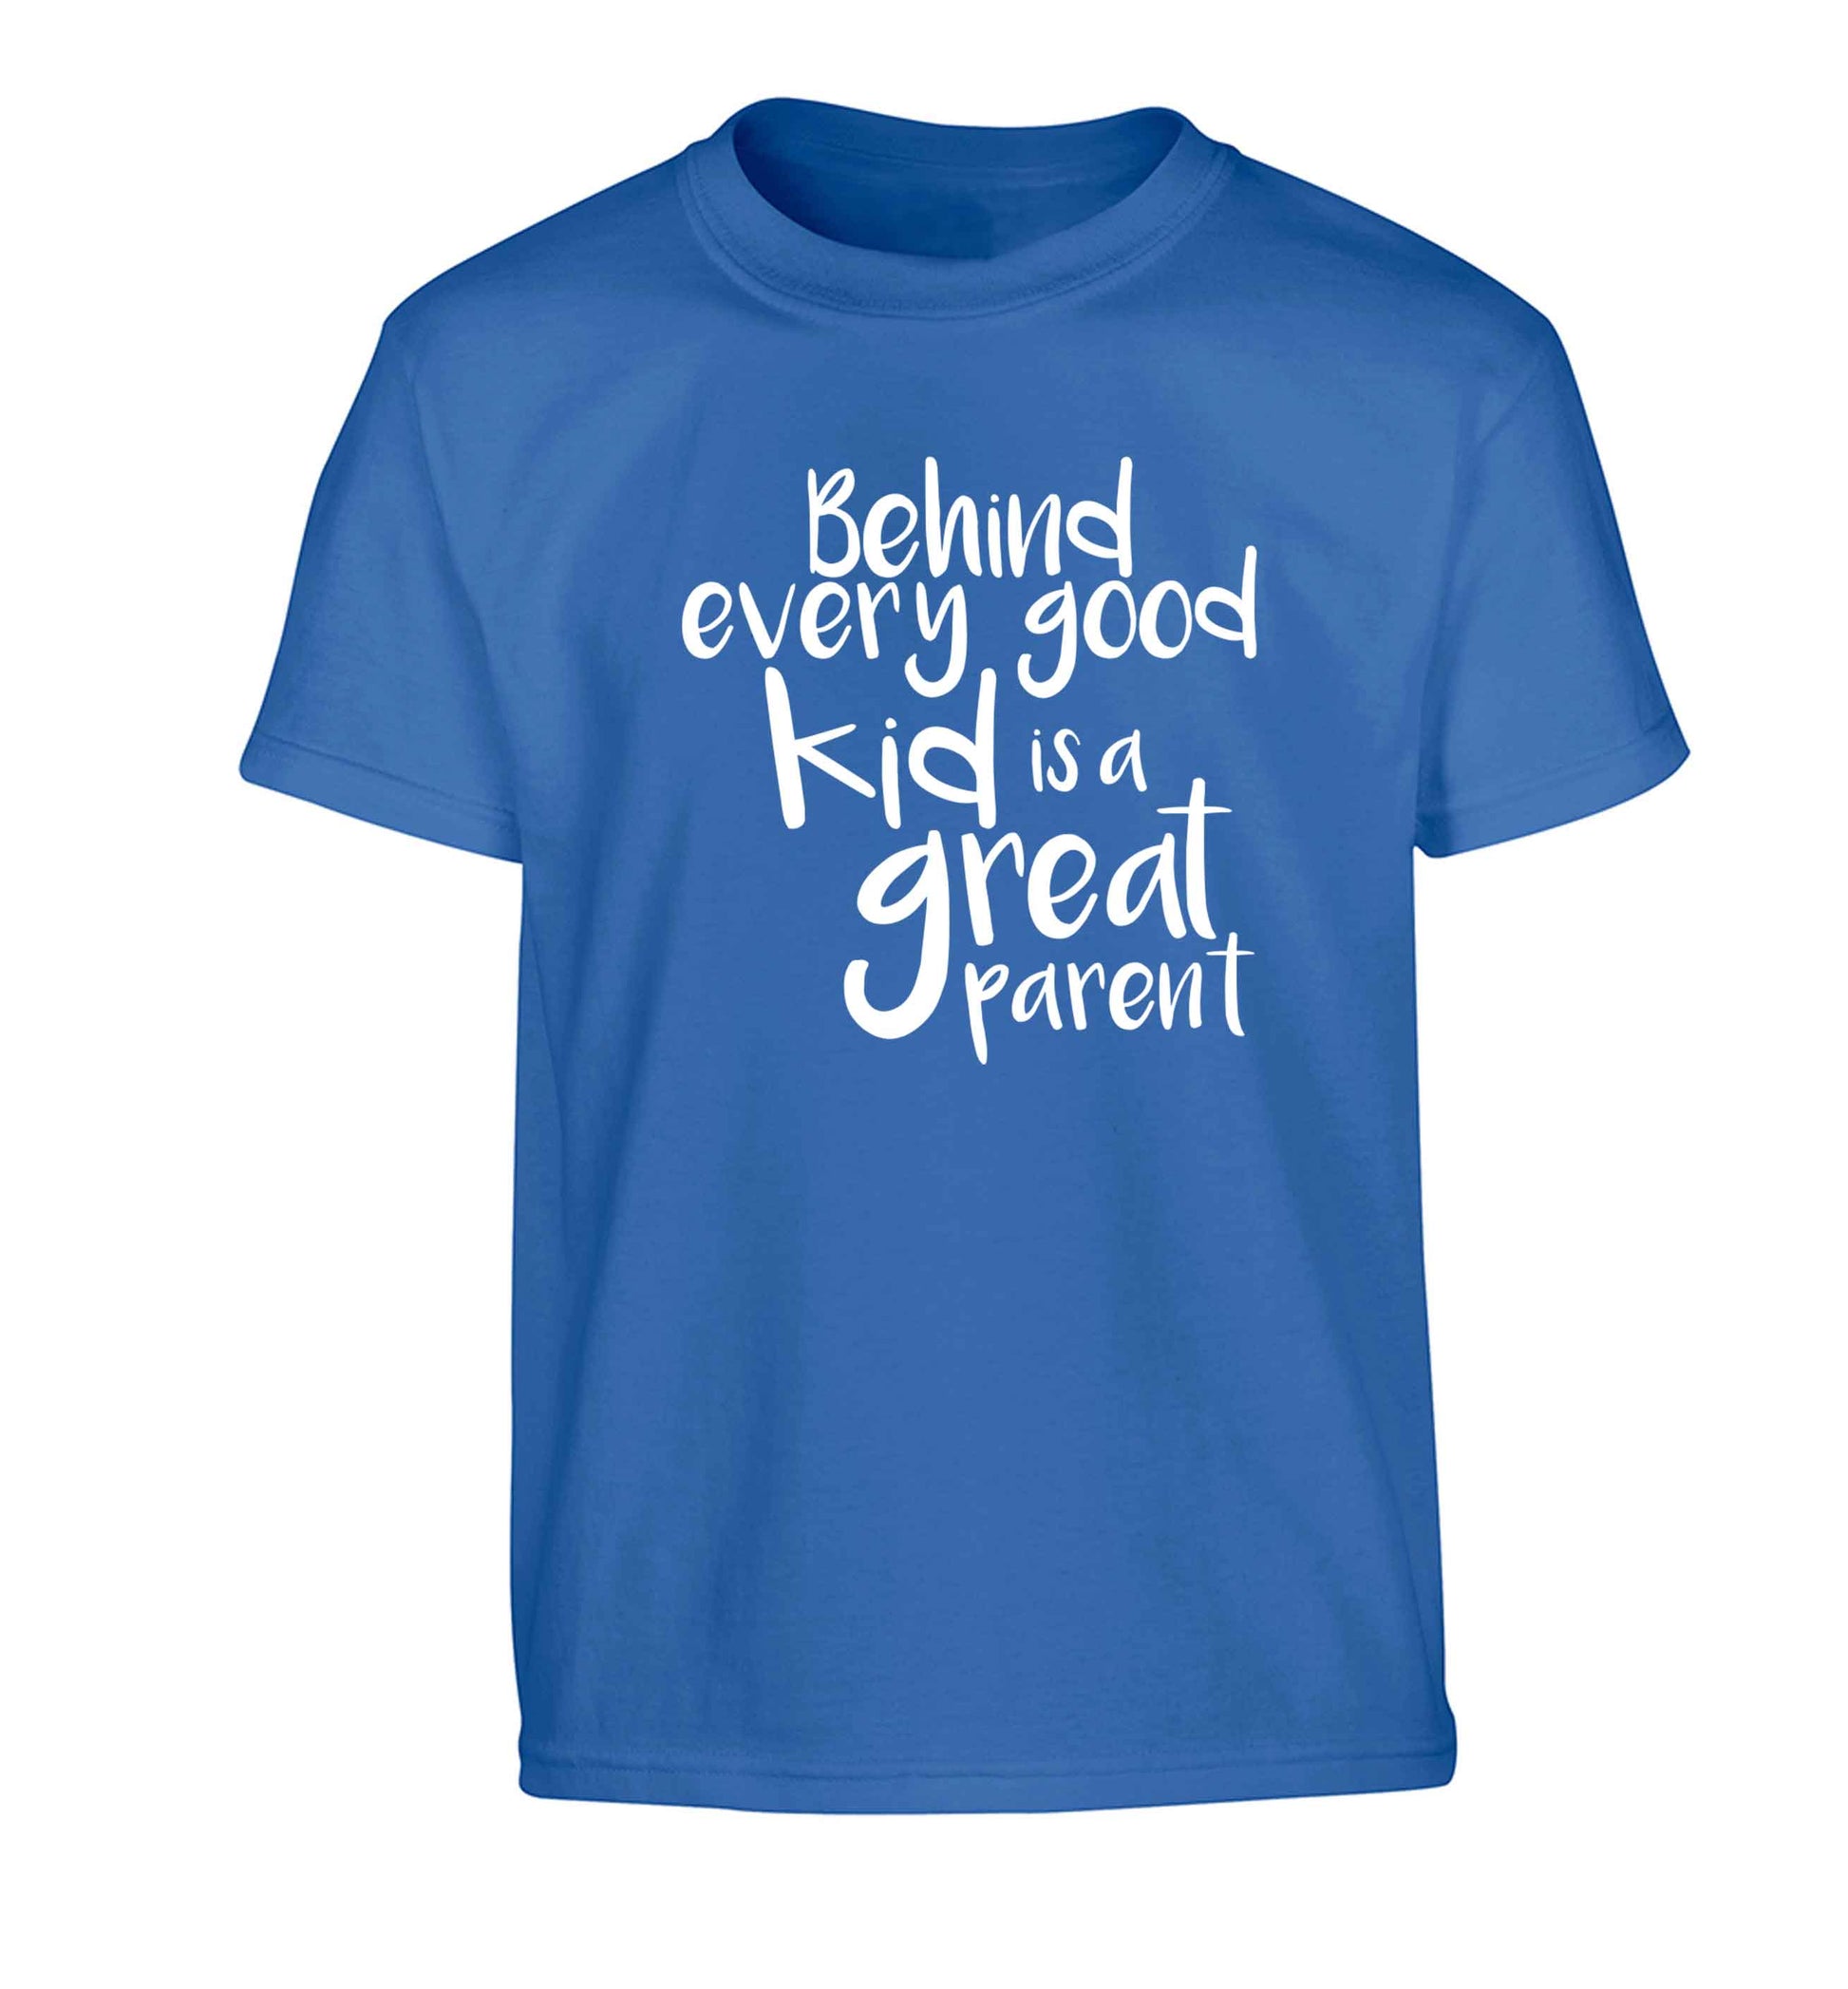 Behind every good kid is a great parent Children's blue Tshirt 12-13 Years